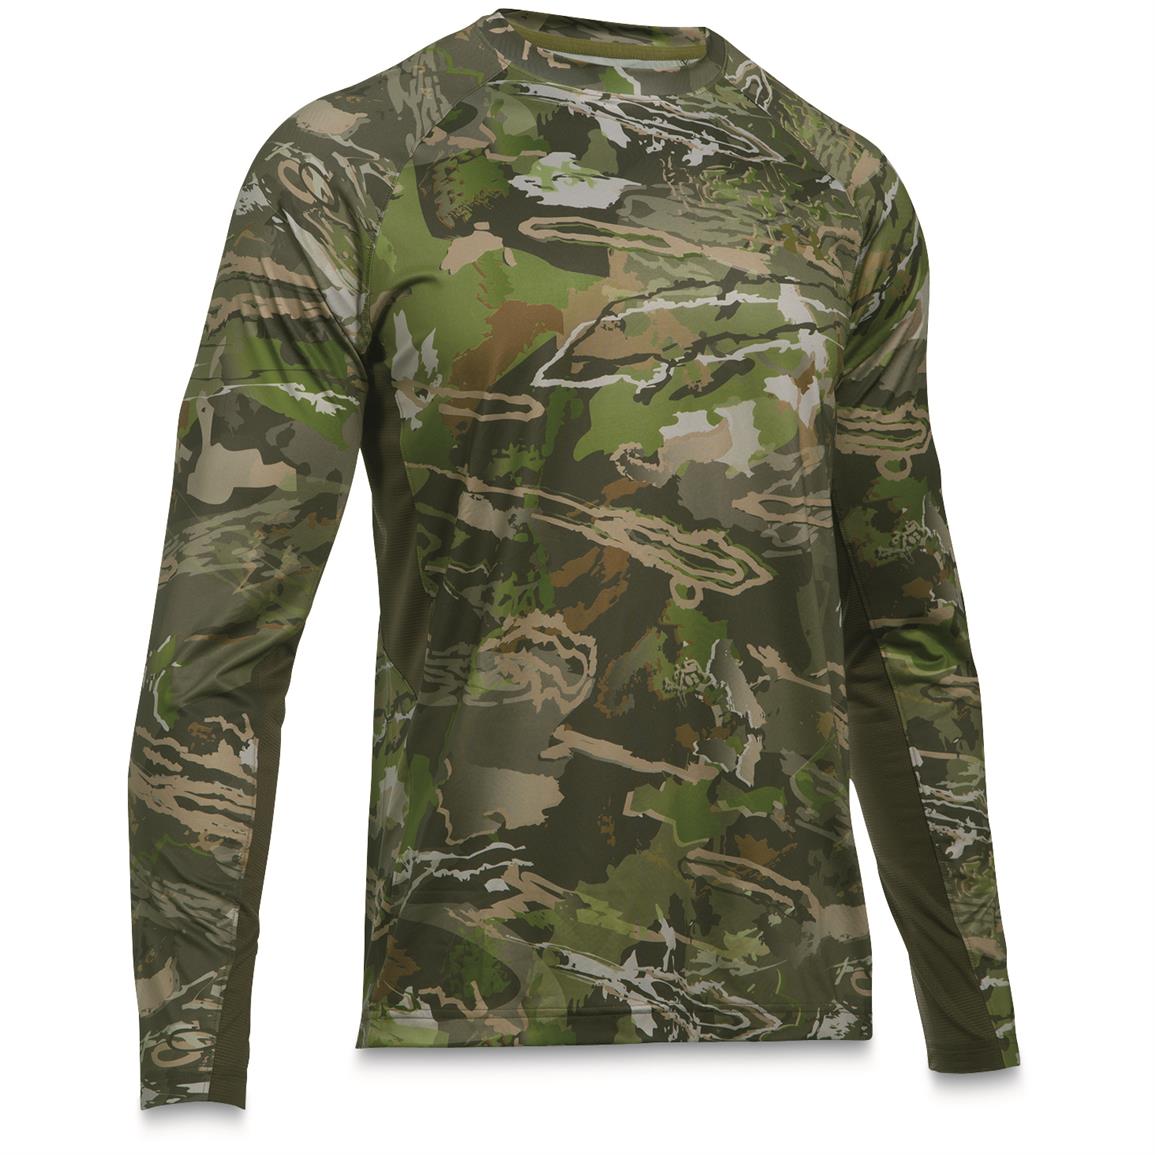 Under Armour Men's CoolSwitch Camo Long Sleeve Shirt - 676685, Camo ...